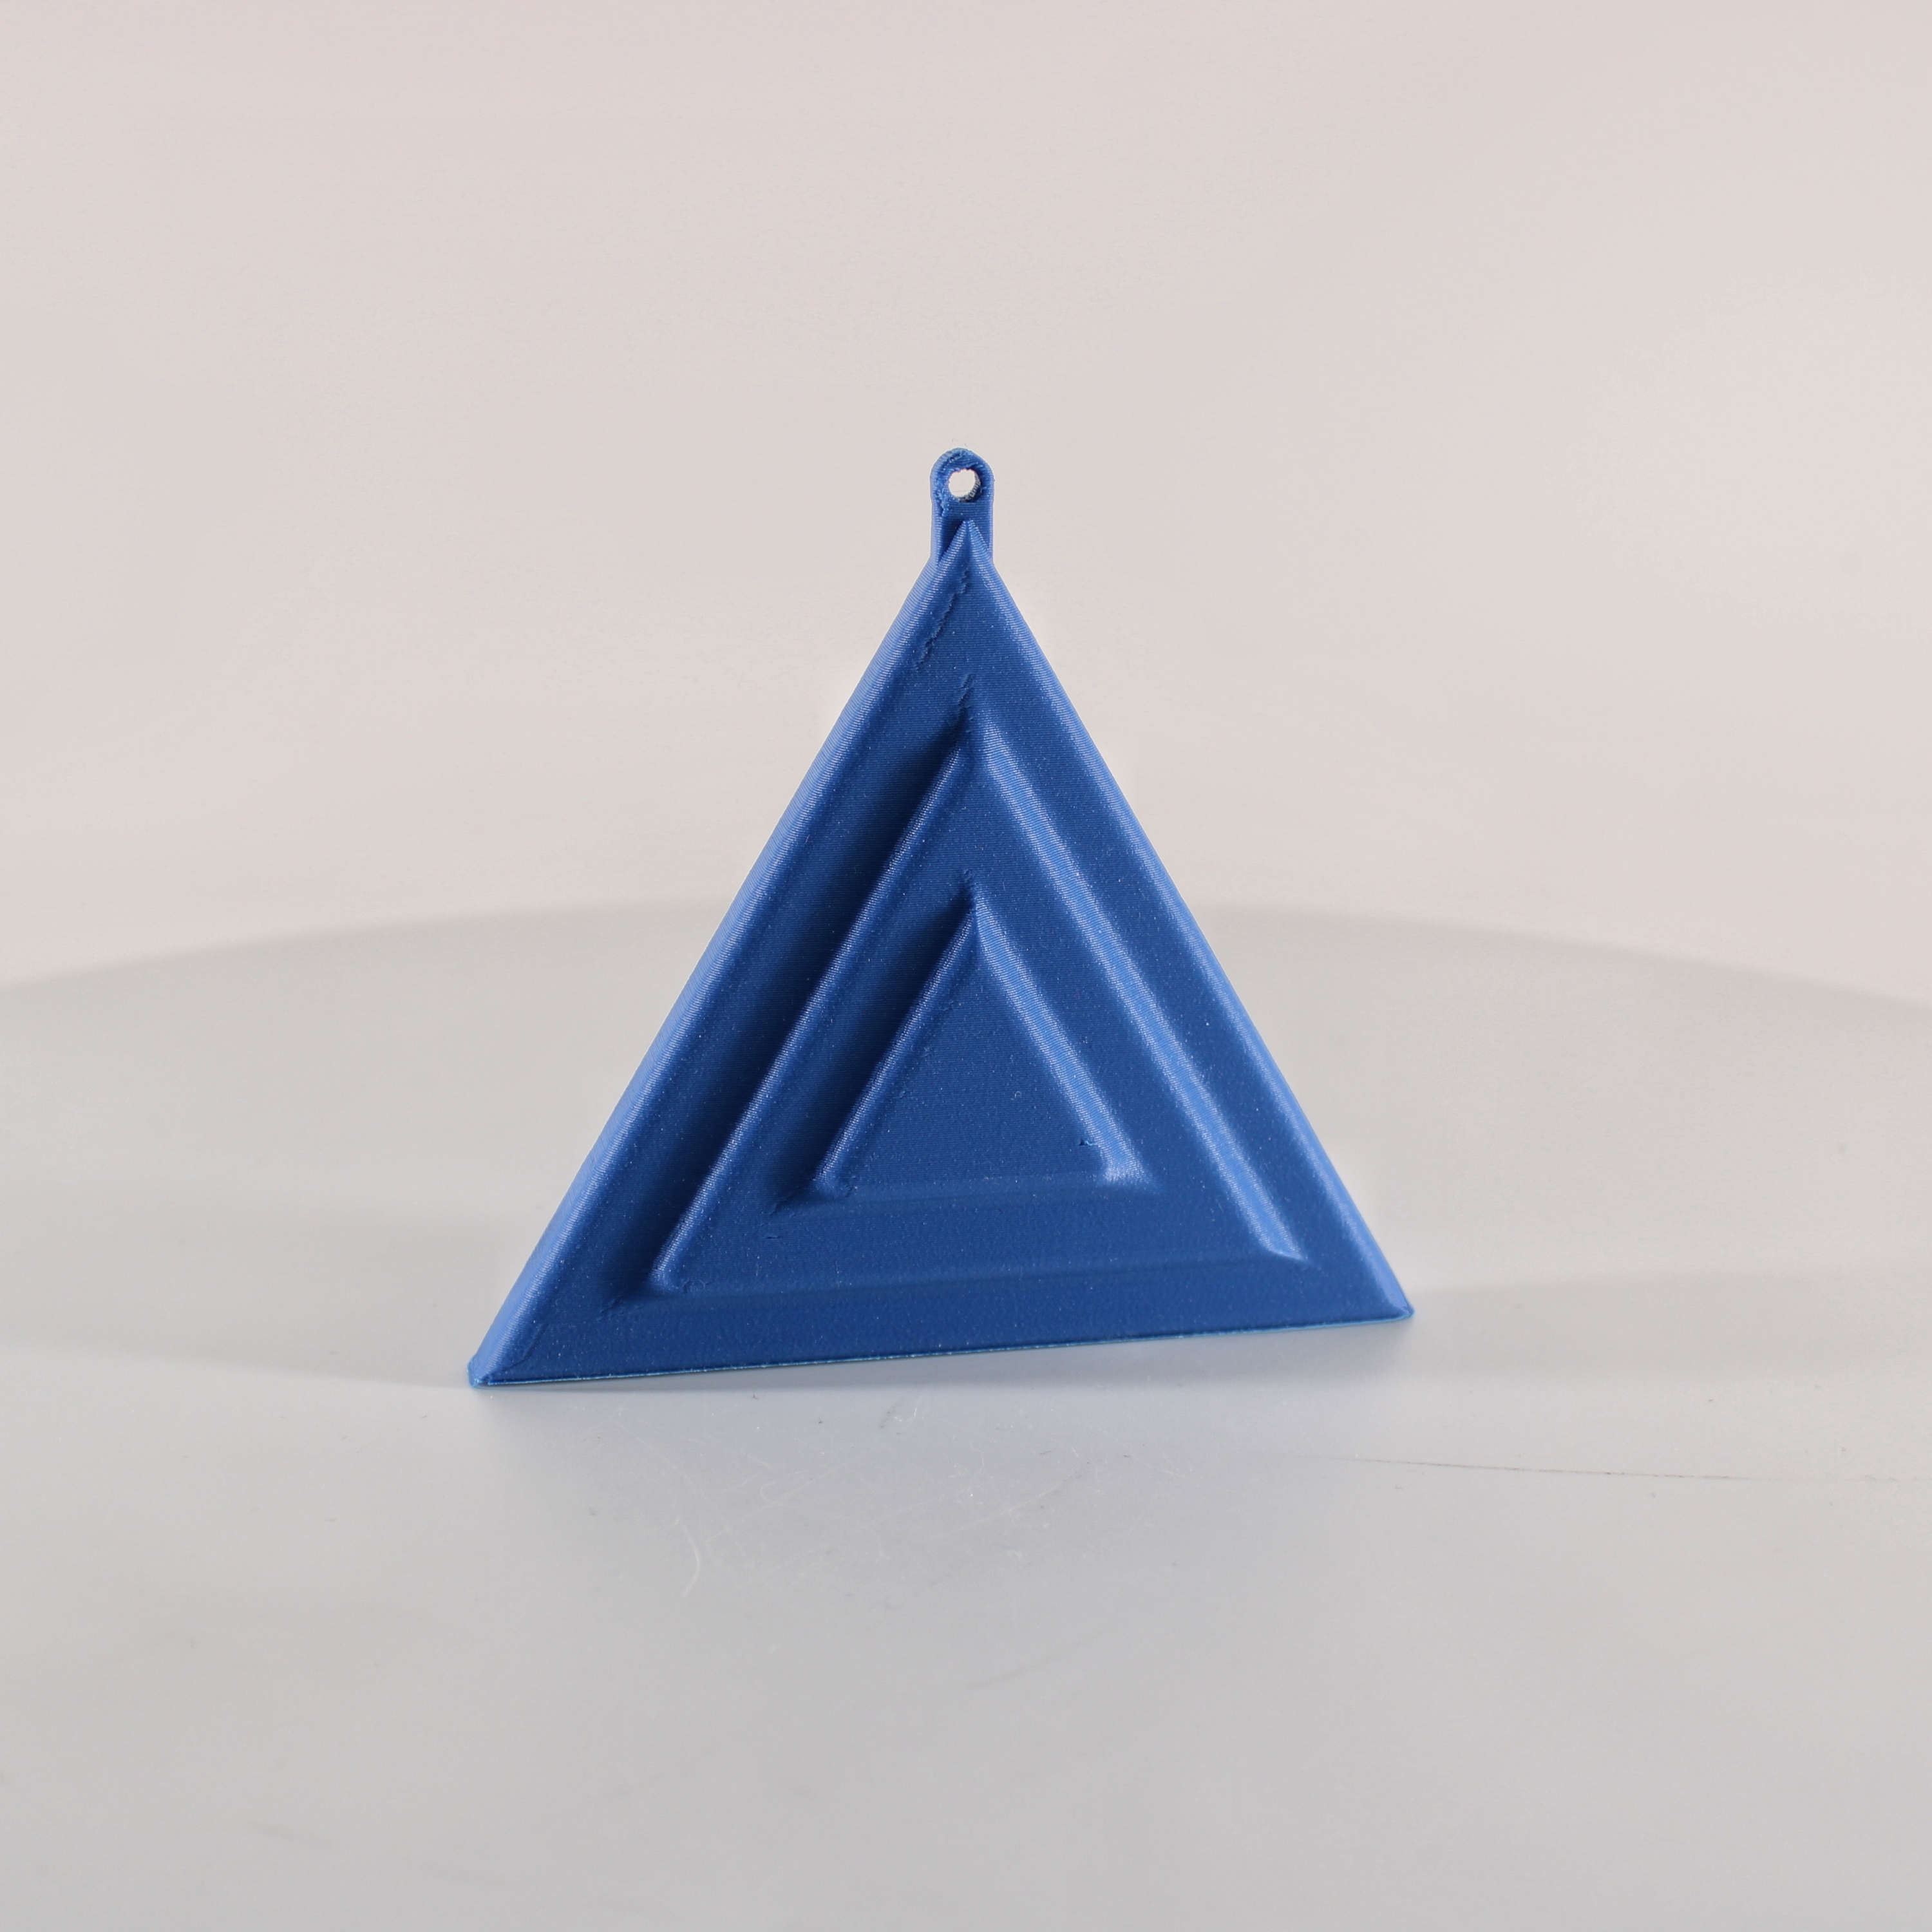 Additive Triangle Tree Ornament, Christmas Decor by Slimprint